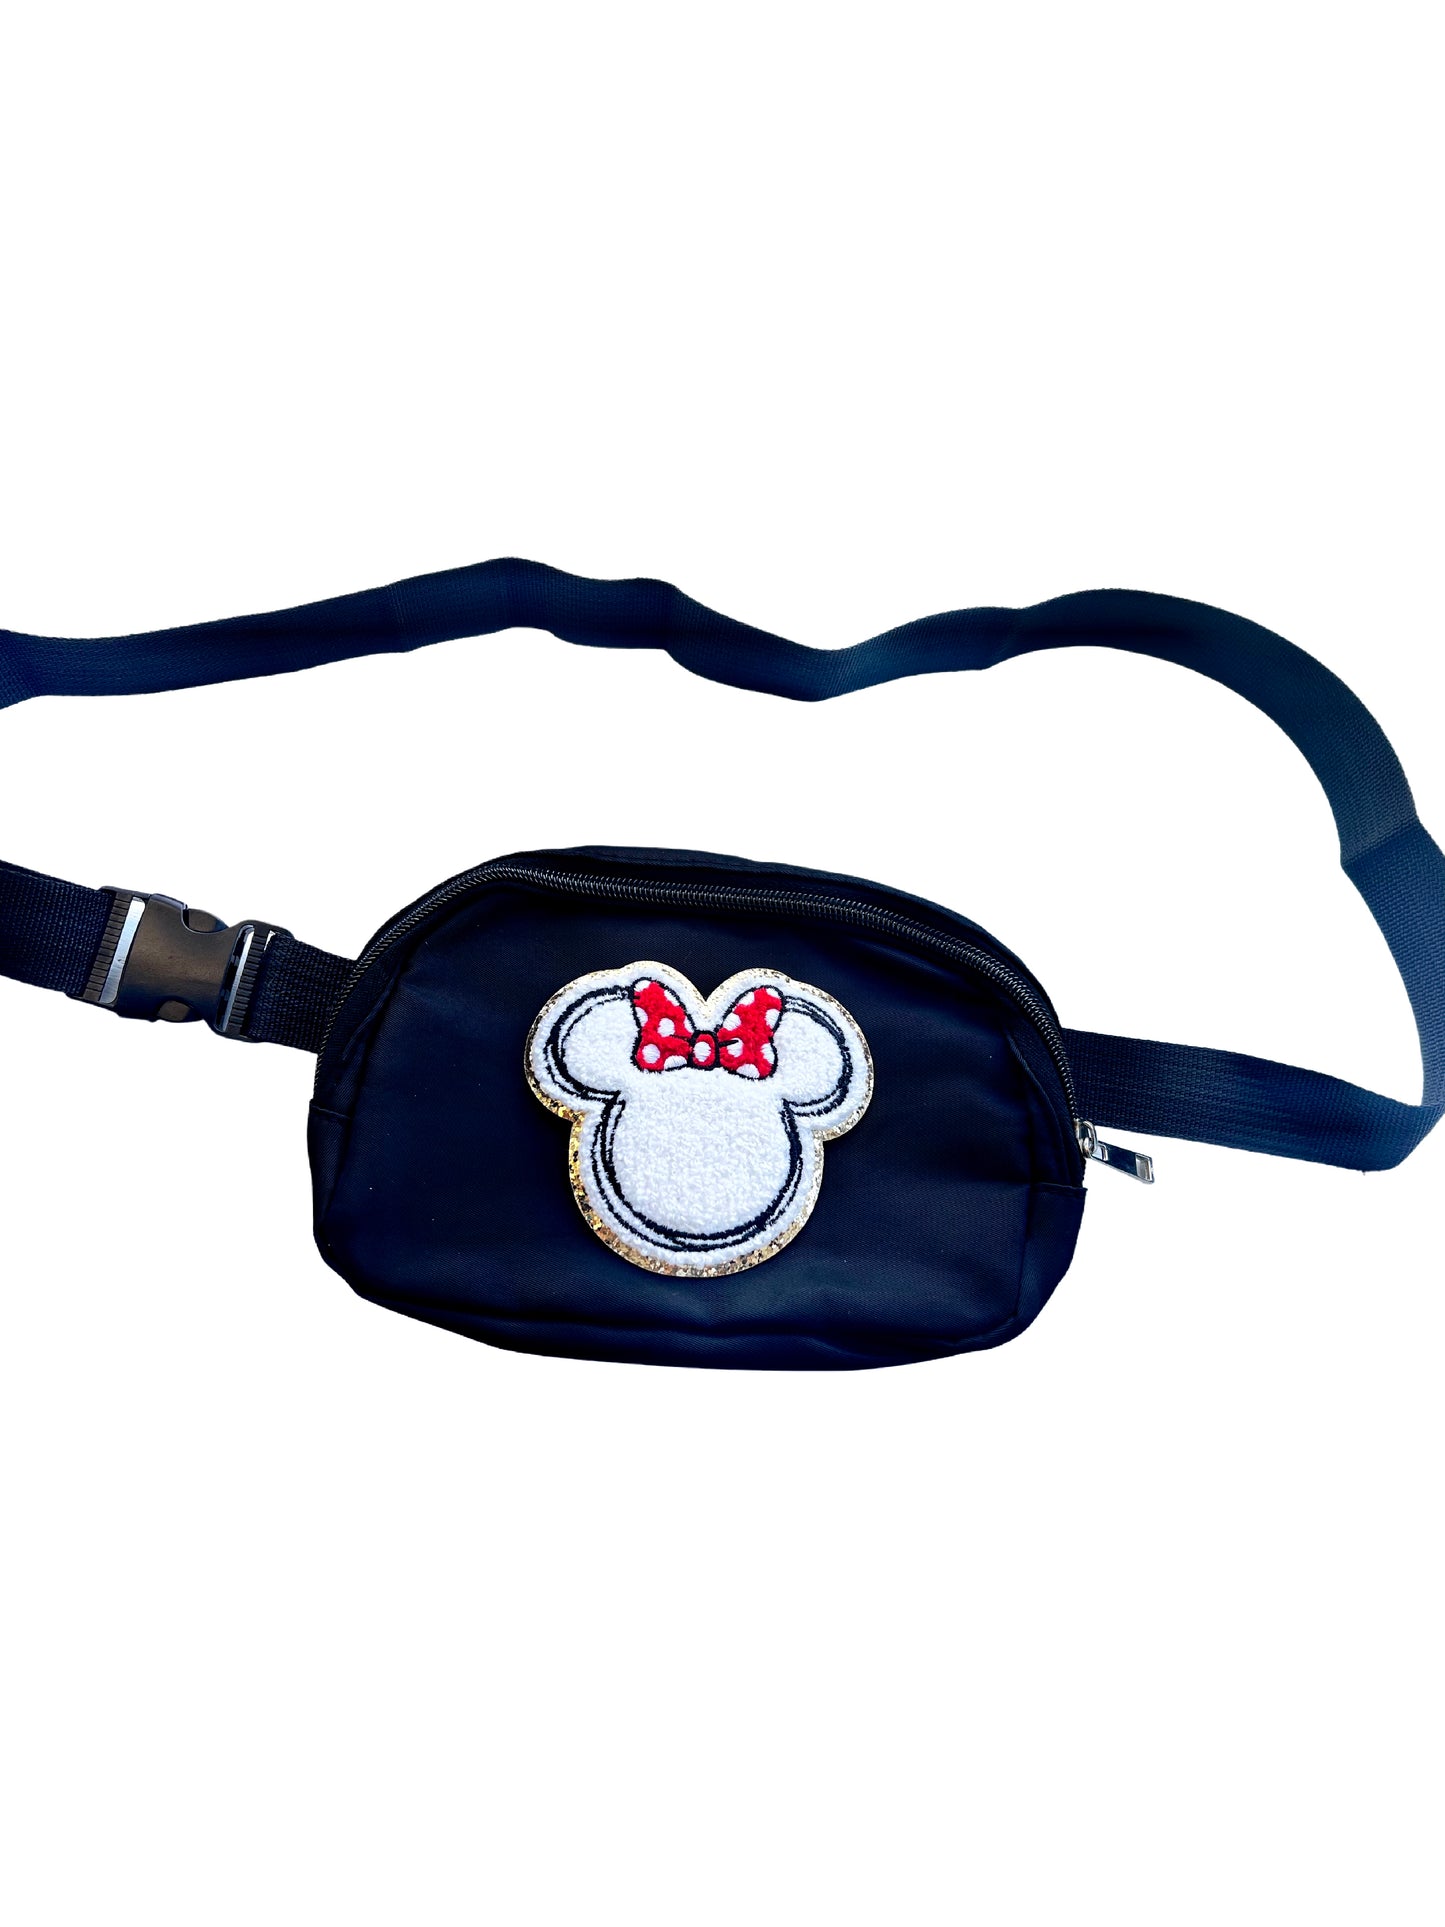 Mouse Ears White with Black Outline and Red Polka Dot Cross-Body Belt Bag Parks Collection